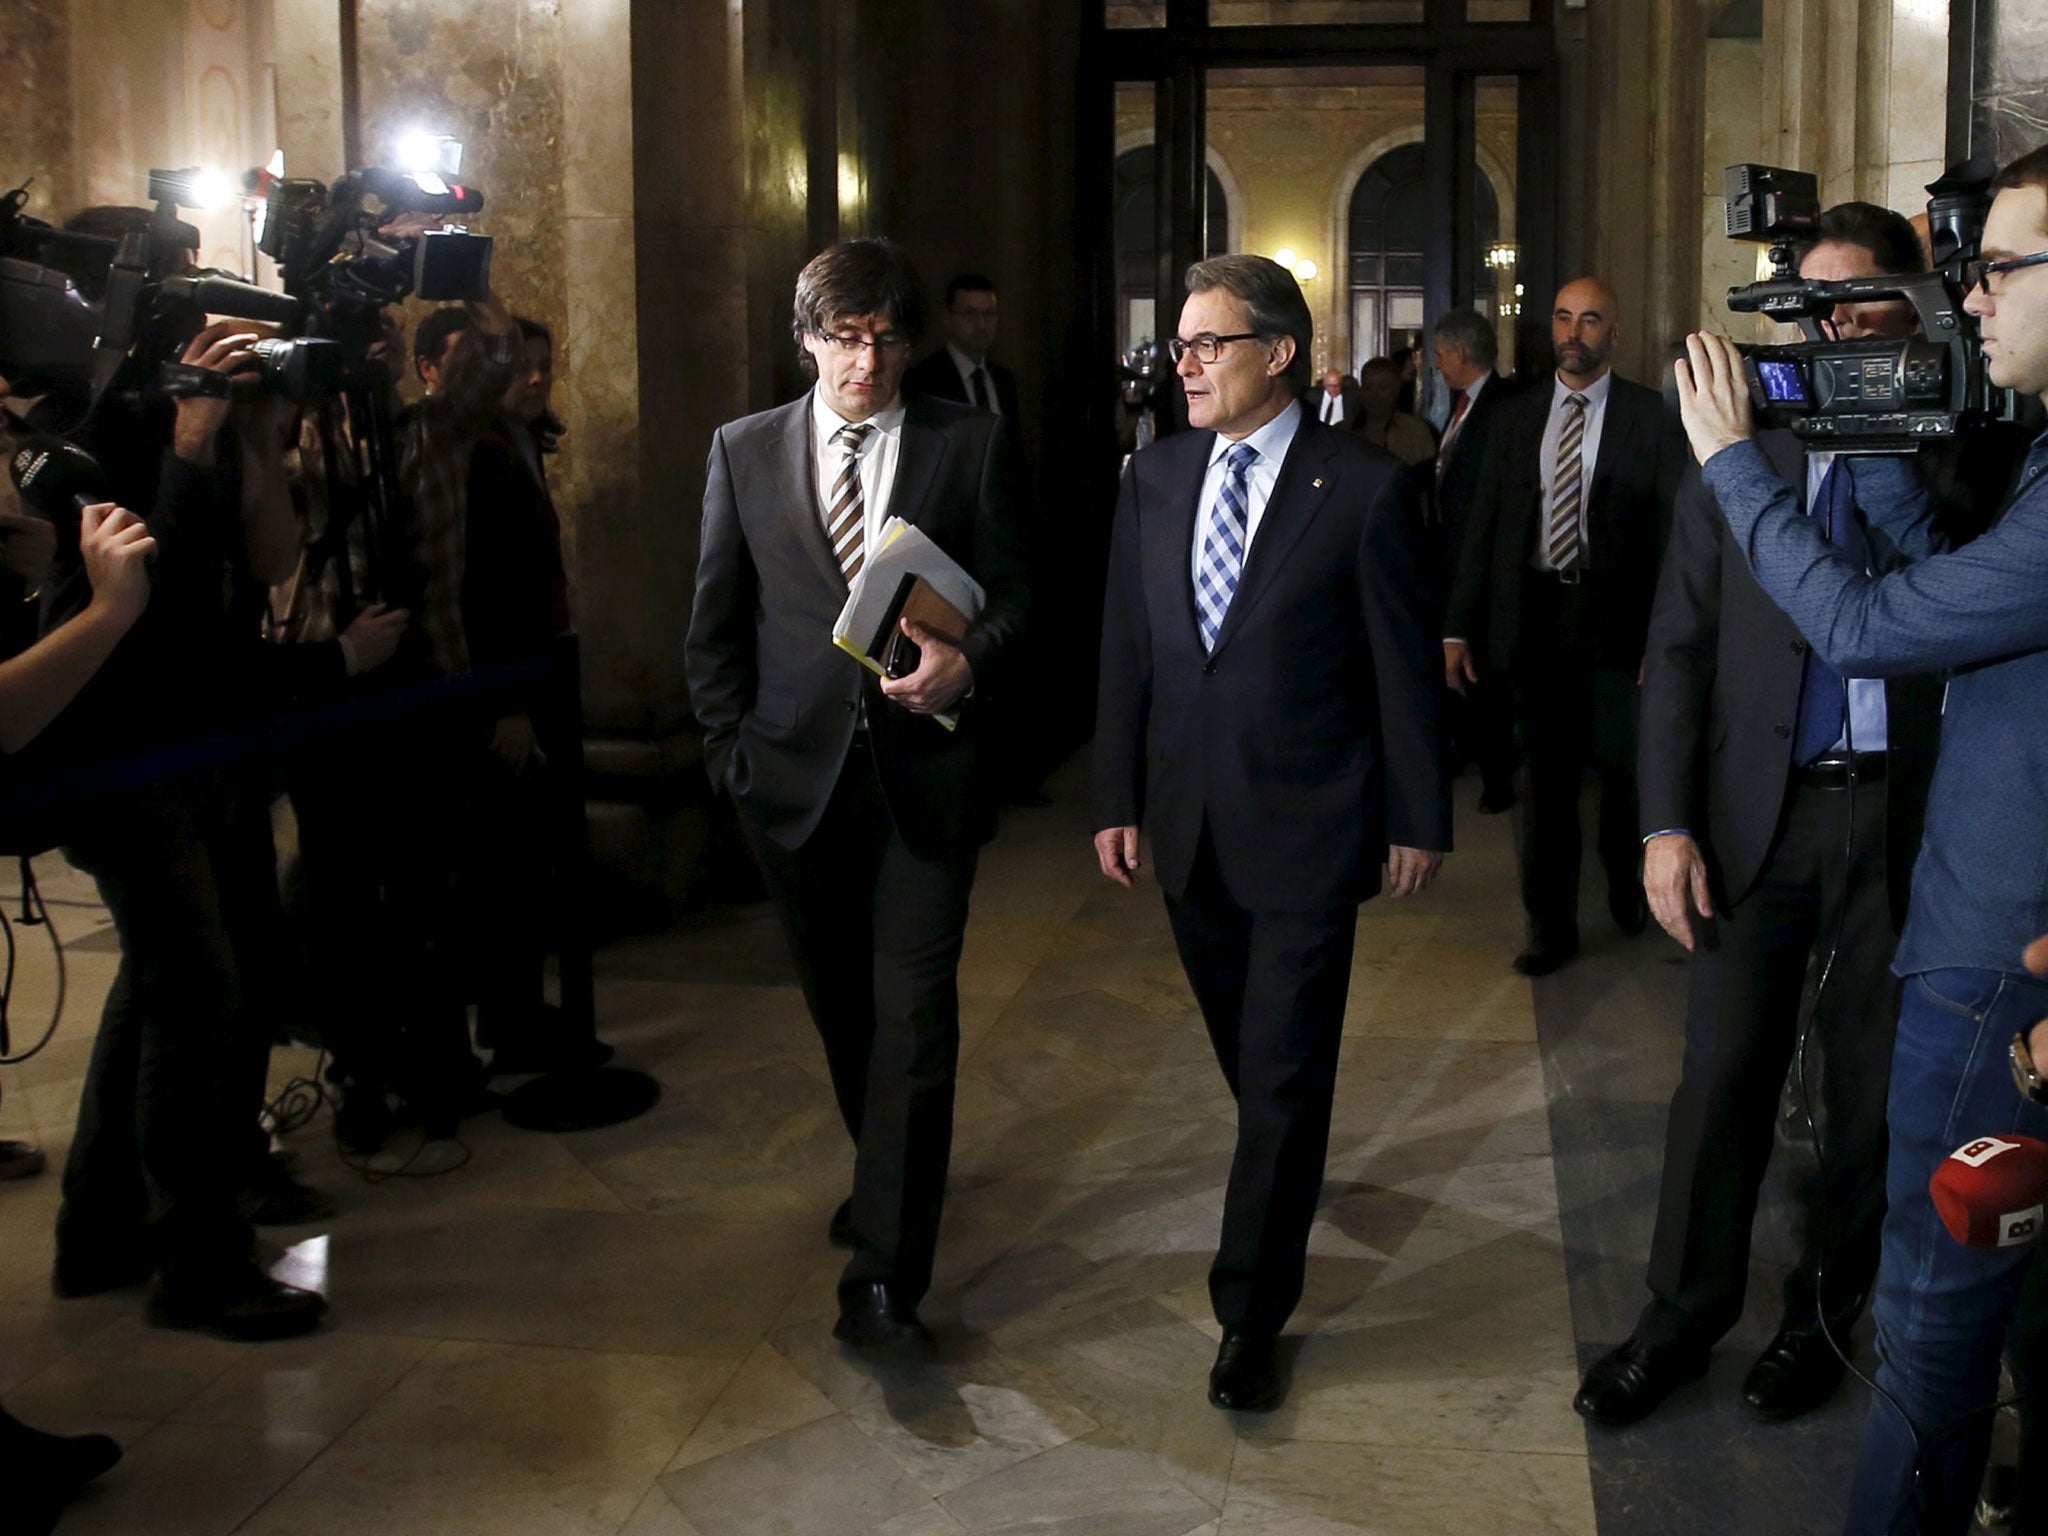 Incoming Catalan President Carles Puigdemont, left, and outgoing Catalan President Artur Mas speak in the corridors during a break of the investiture session at the Catalunya Parliament in Barcelona